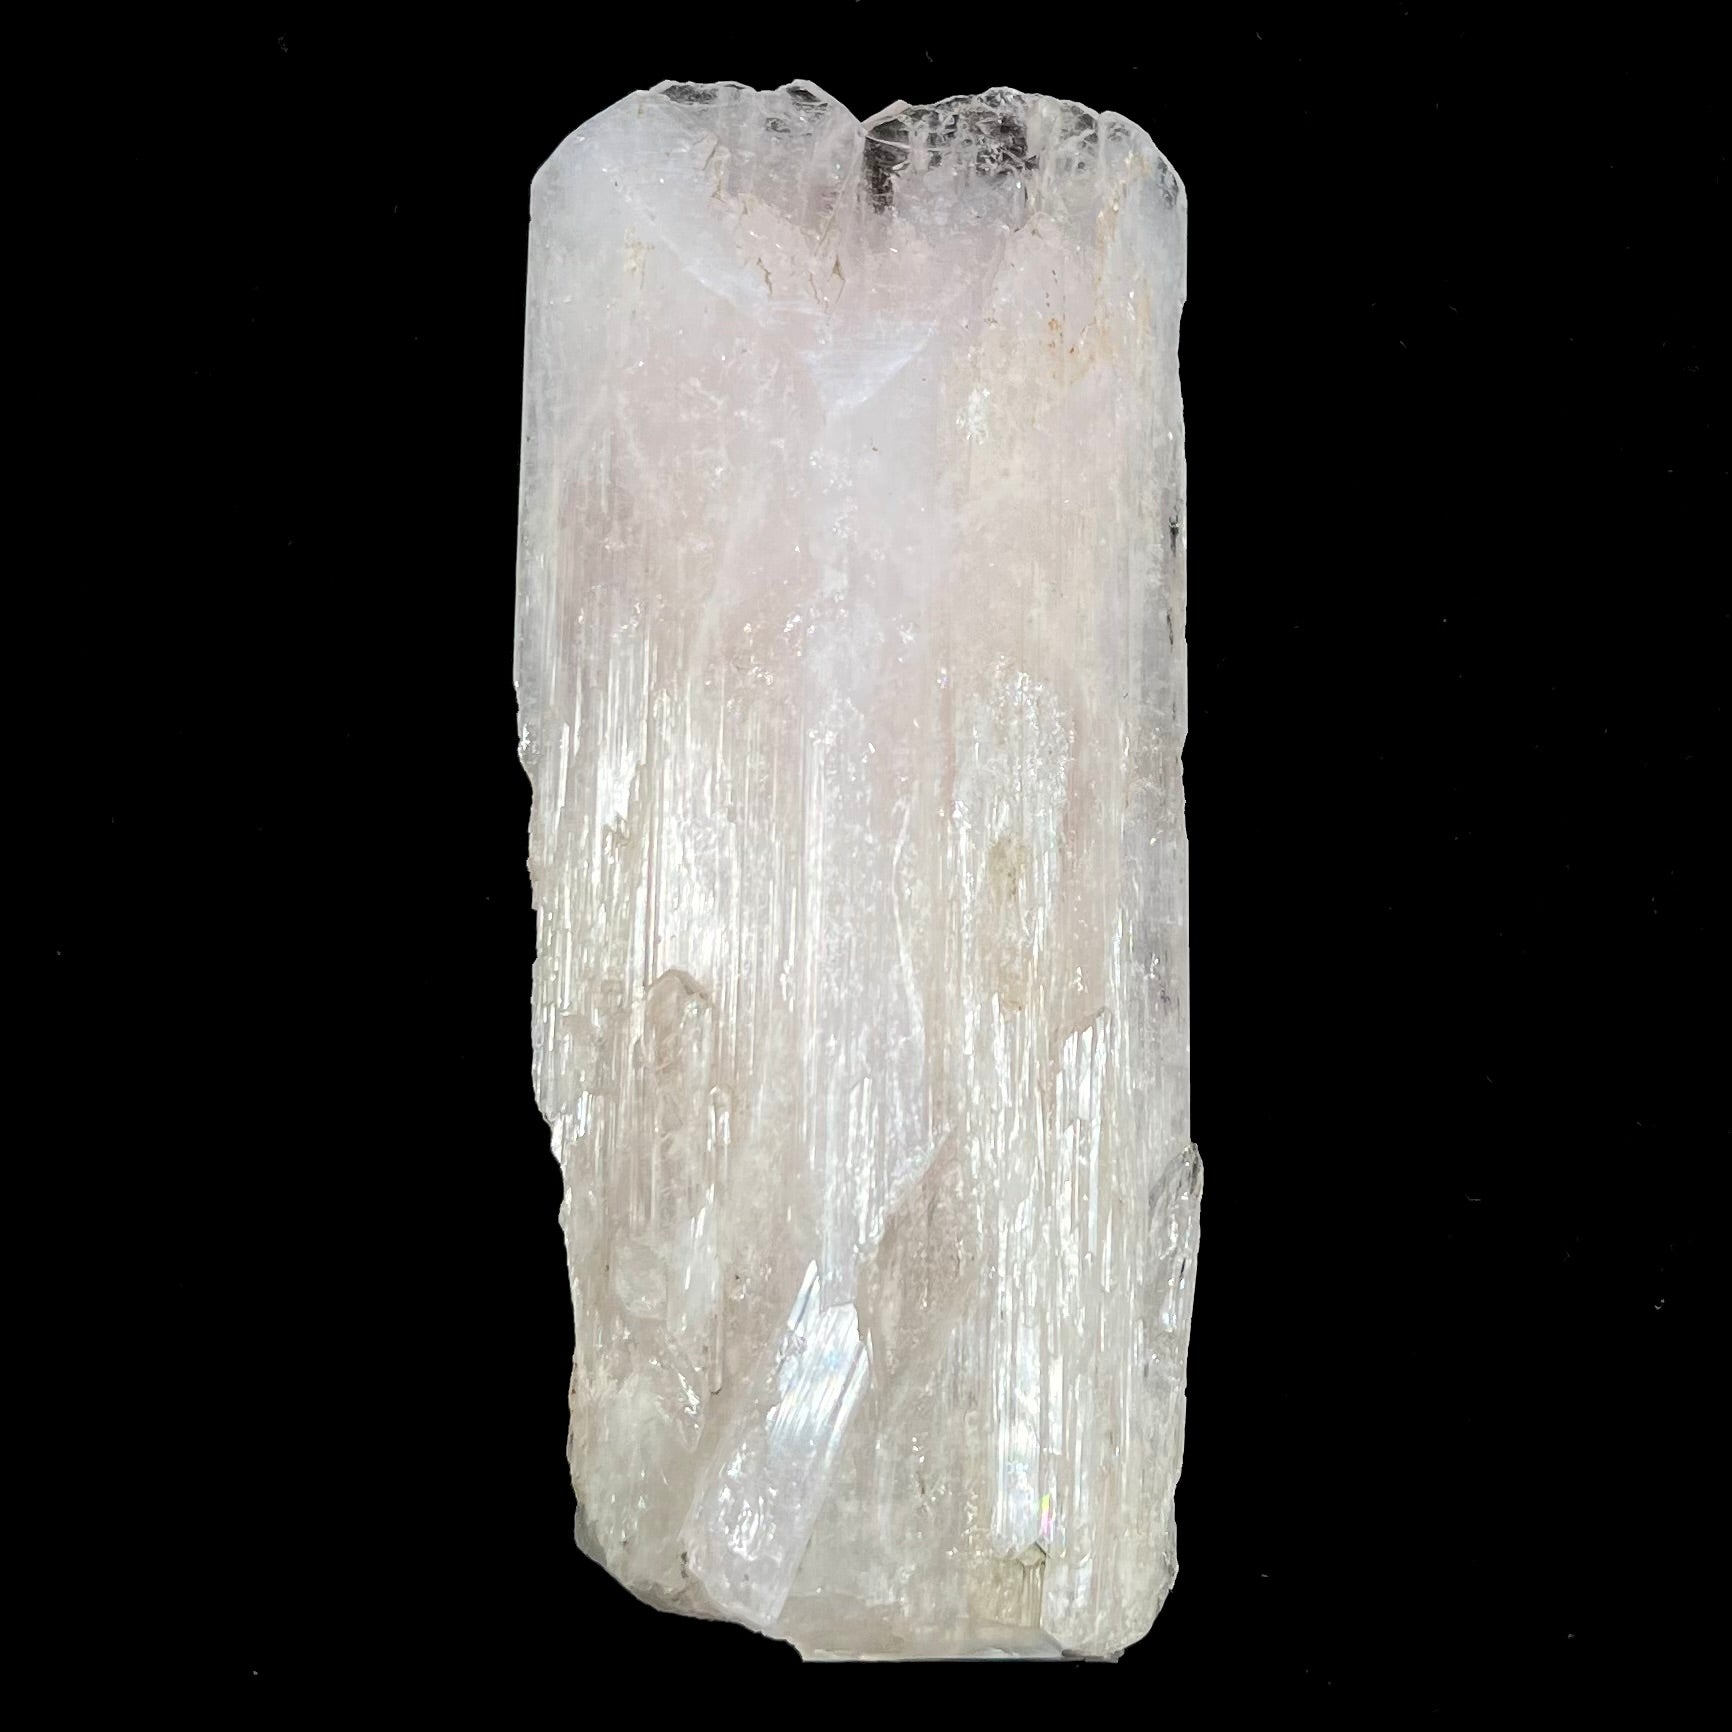 A 5.5 inch long pink danburite crystal that weighs over one pound.